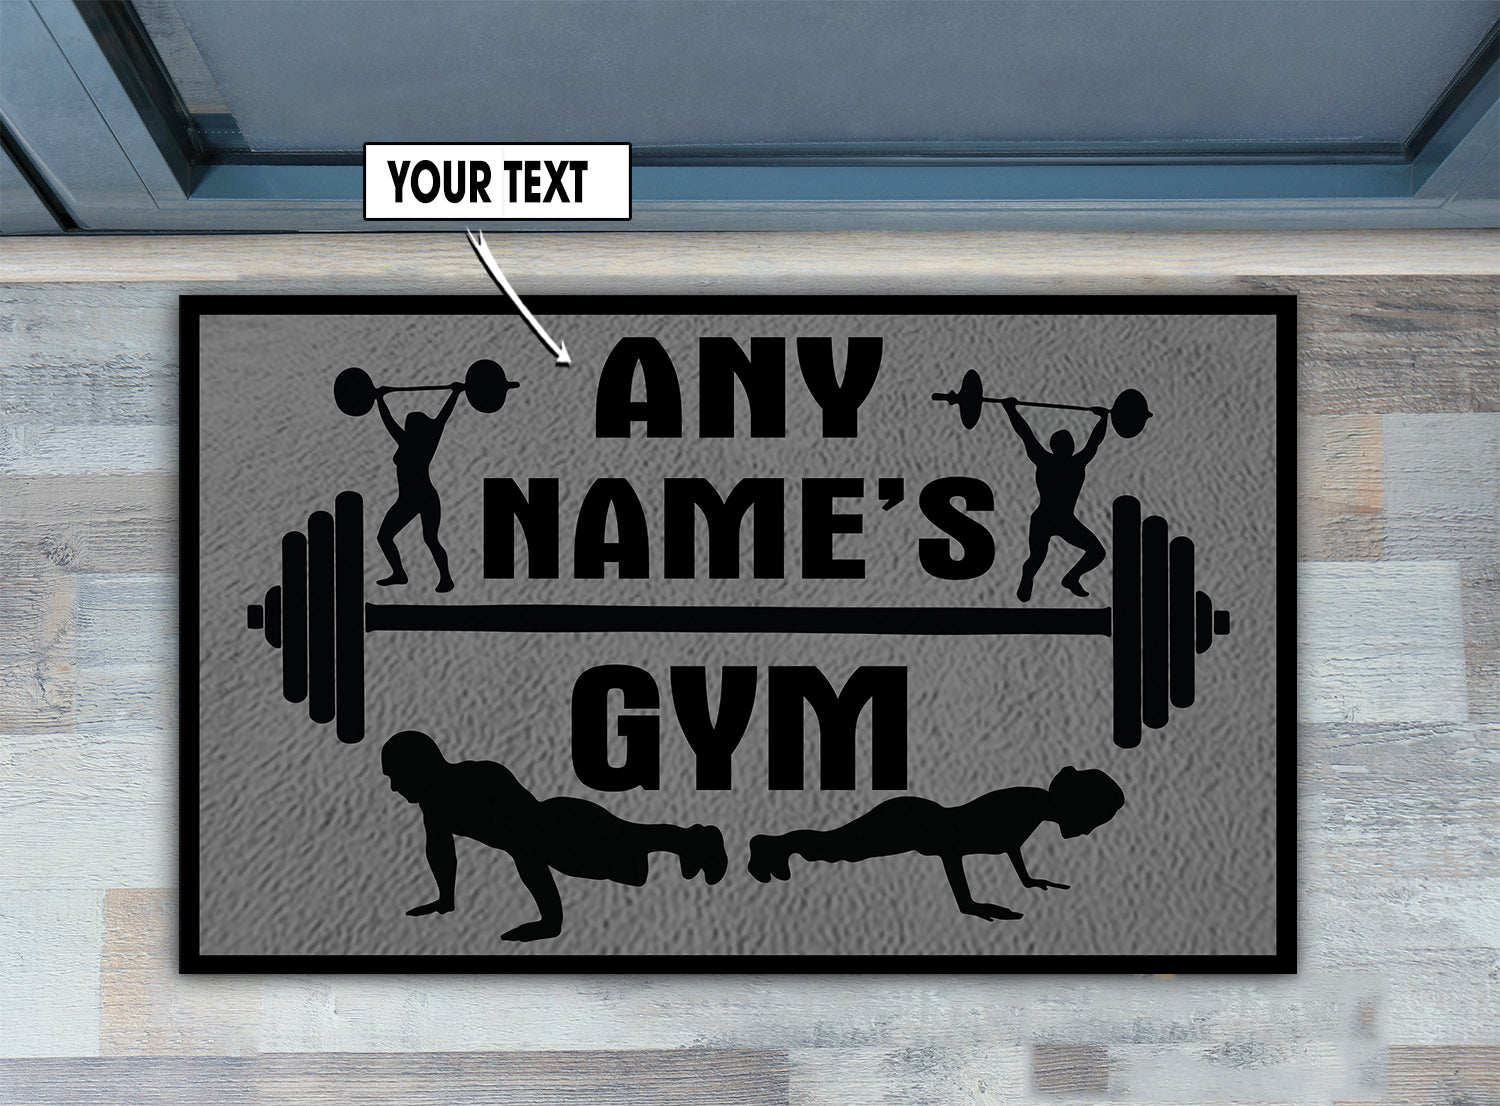 Personalized Home Gym Decor Beauty And The Beast Doormat